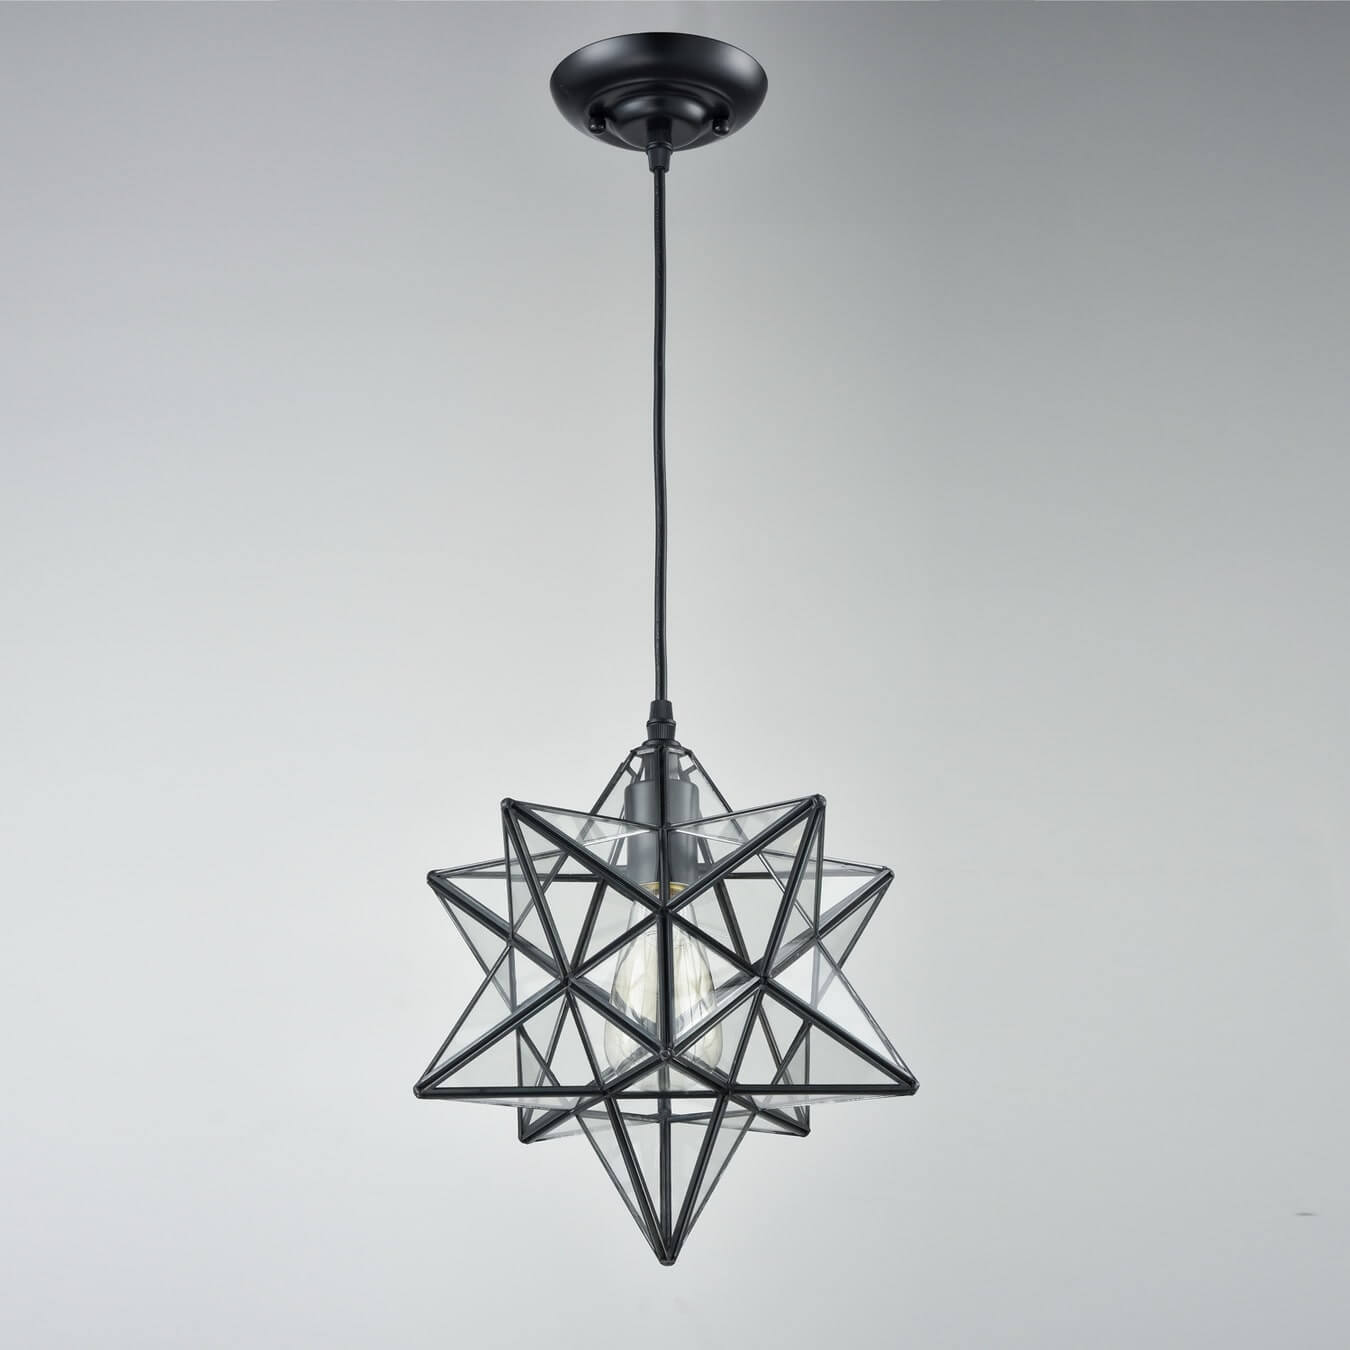 Moravian Star Pendant Lights Clear Glass Shade, 12''